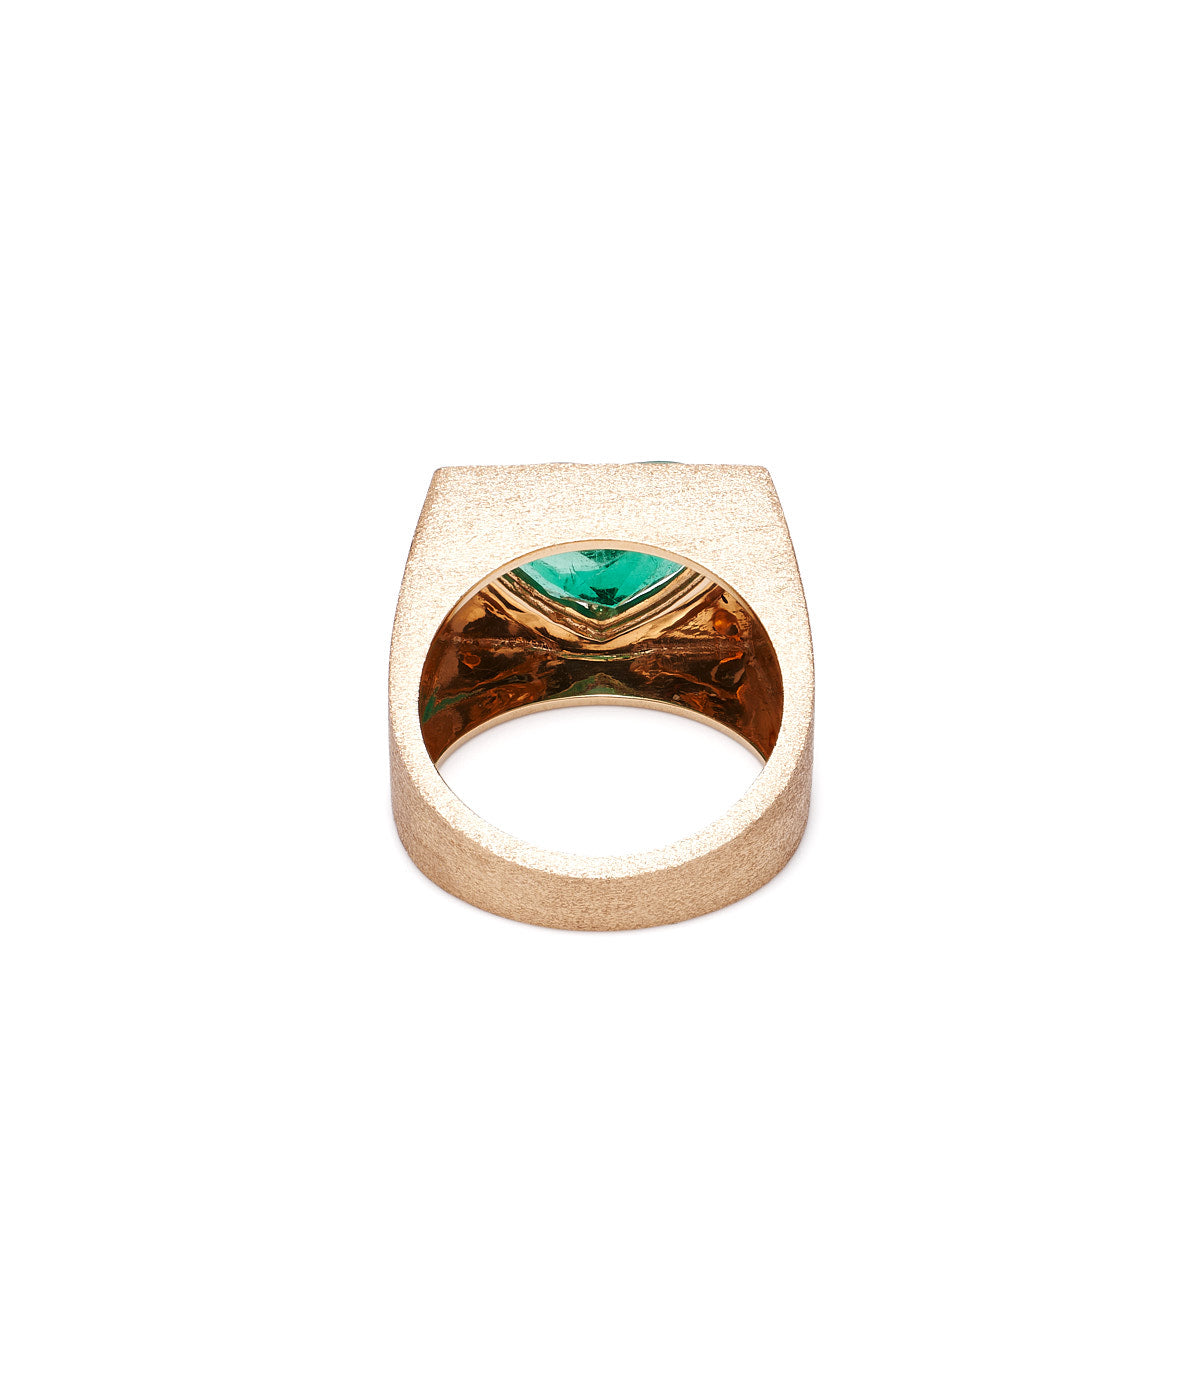 The emerald queen 18K yellow gold ring